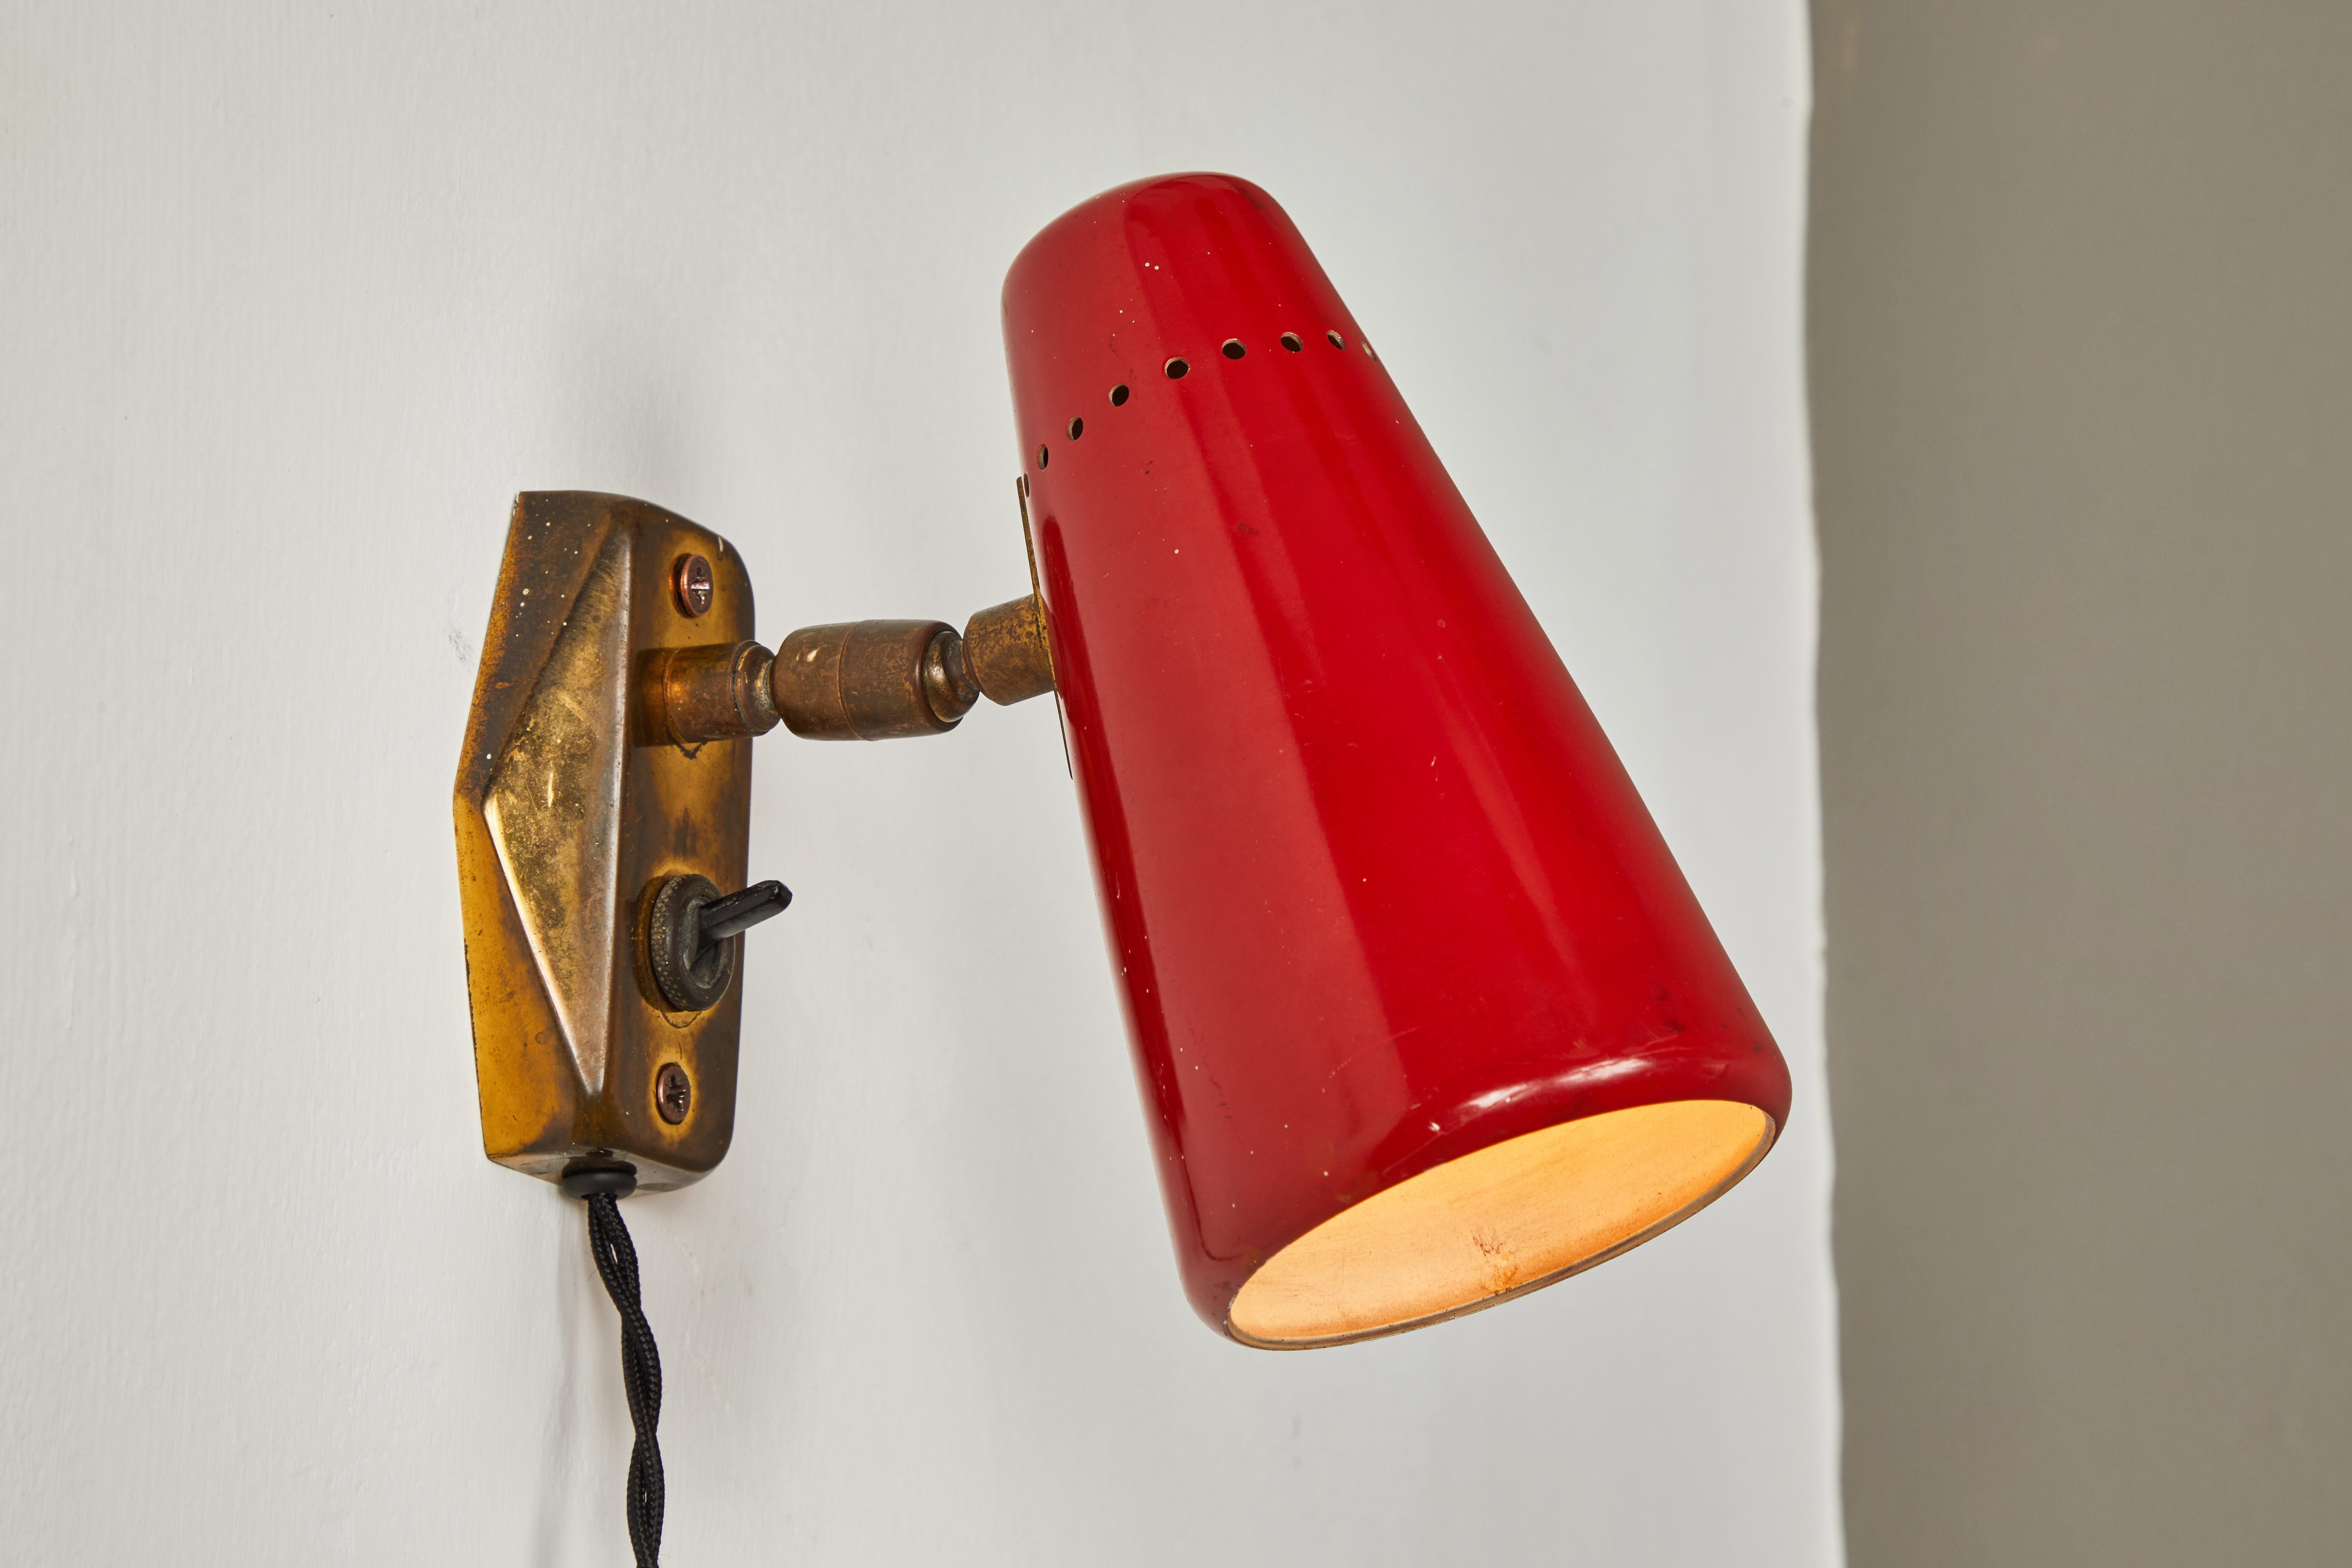 Pair of red 1950s Stilnovo sconces. A quintessentially 1950s Italian design executed in red painted metal with original Italian backplates, black cloth cord and US period styled wall plug. Shades can be rotated freely on a brass ball joint. Retains